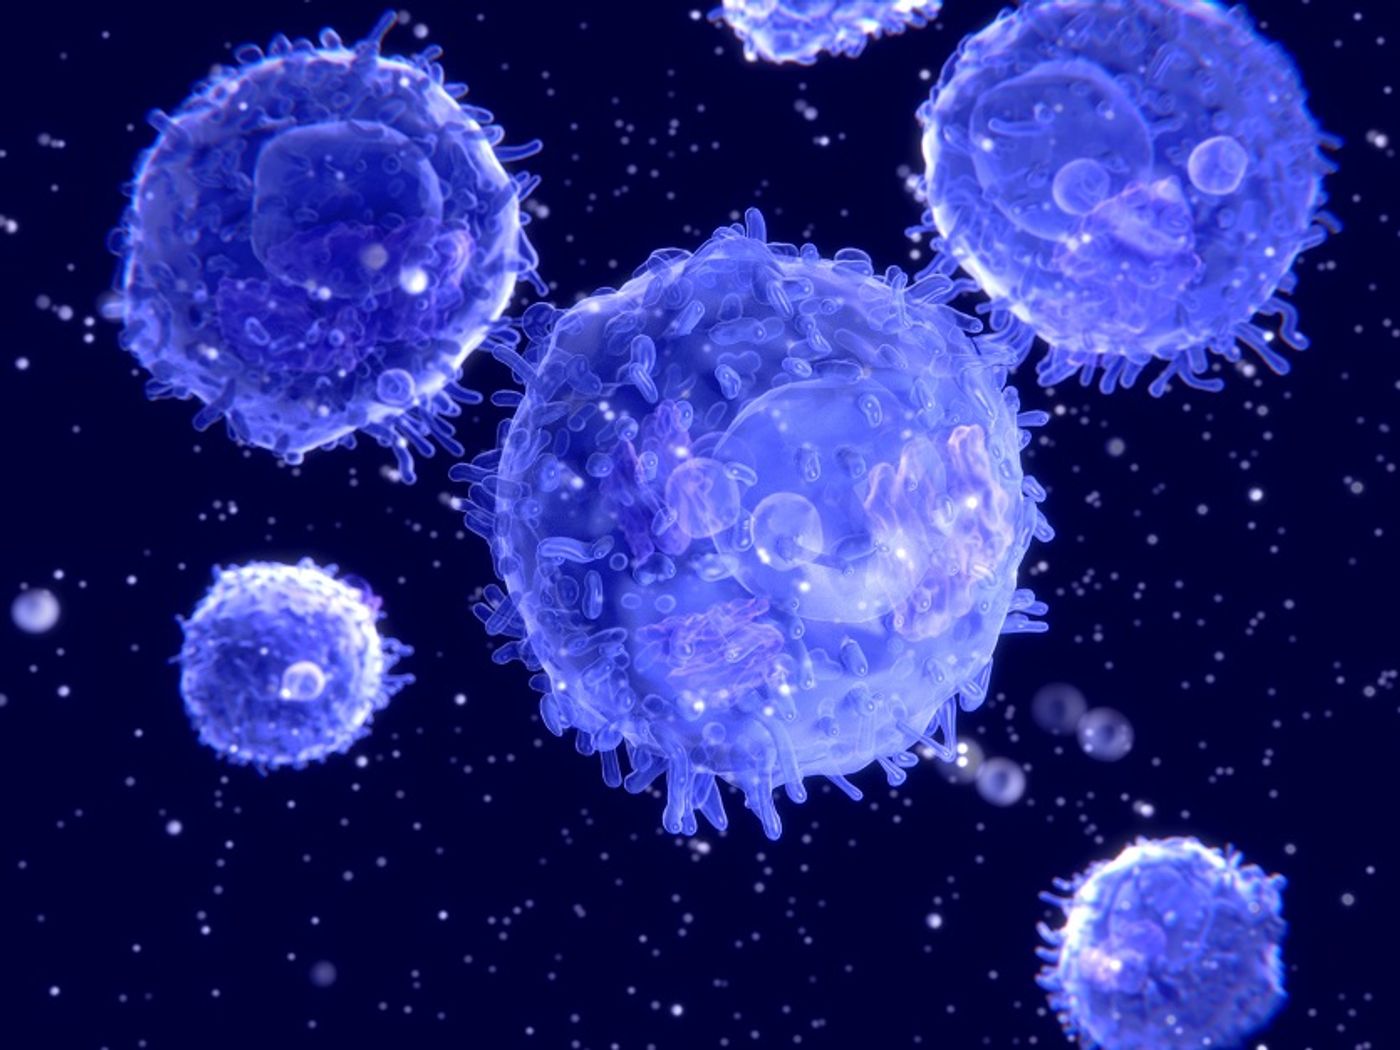 T cells are produced in the thymus and promote cell-mediated immune response, also known as the adaptive immune response. Credit: Pulmonary Fibrosis News